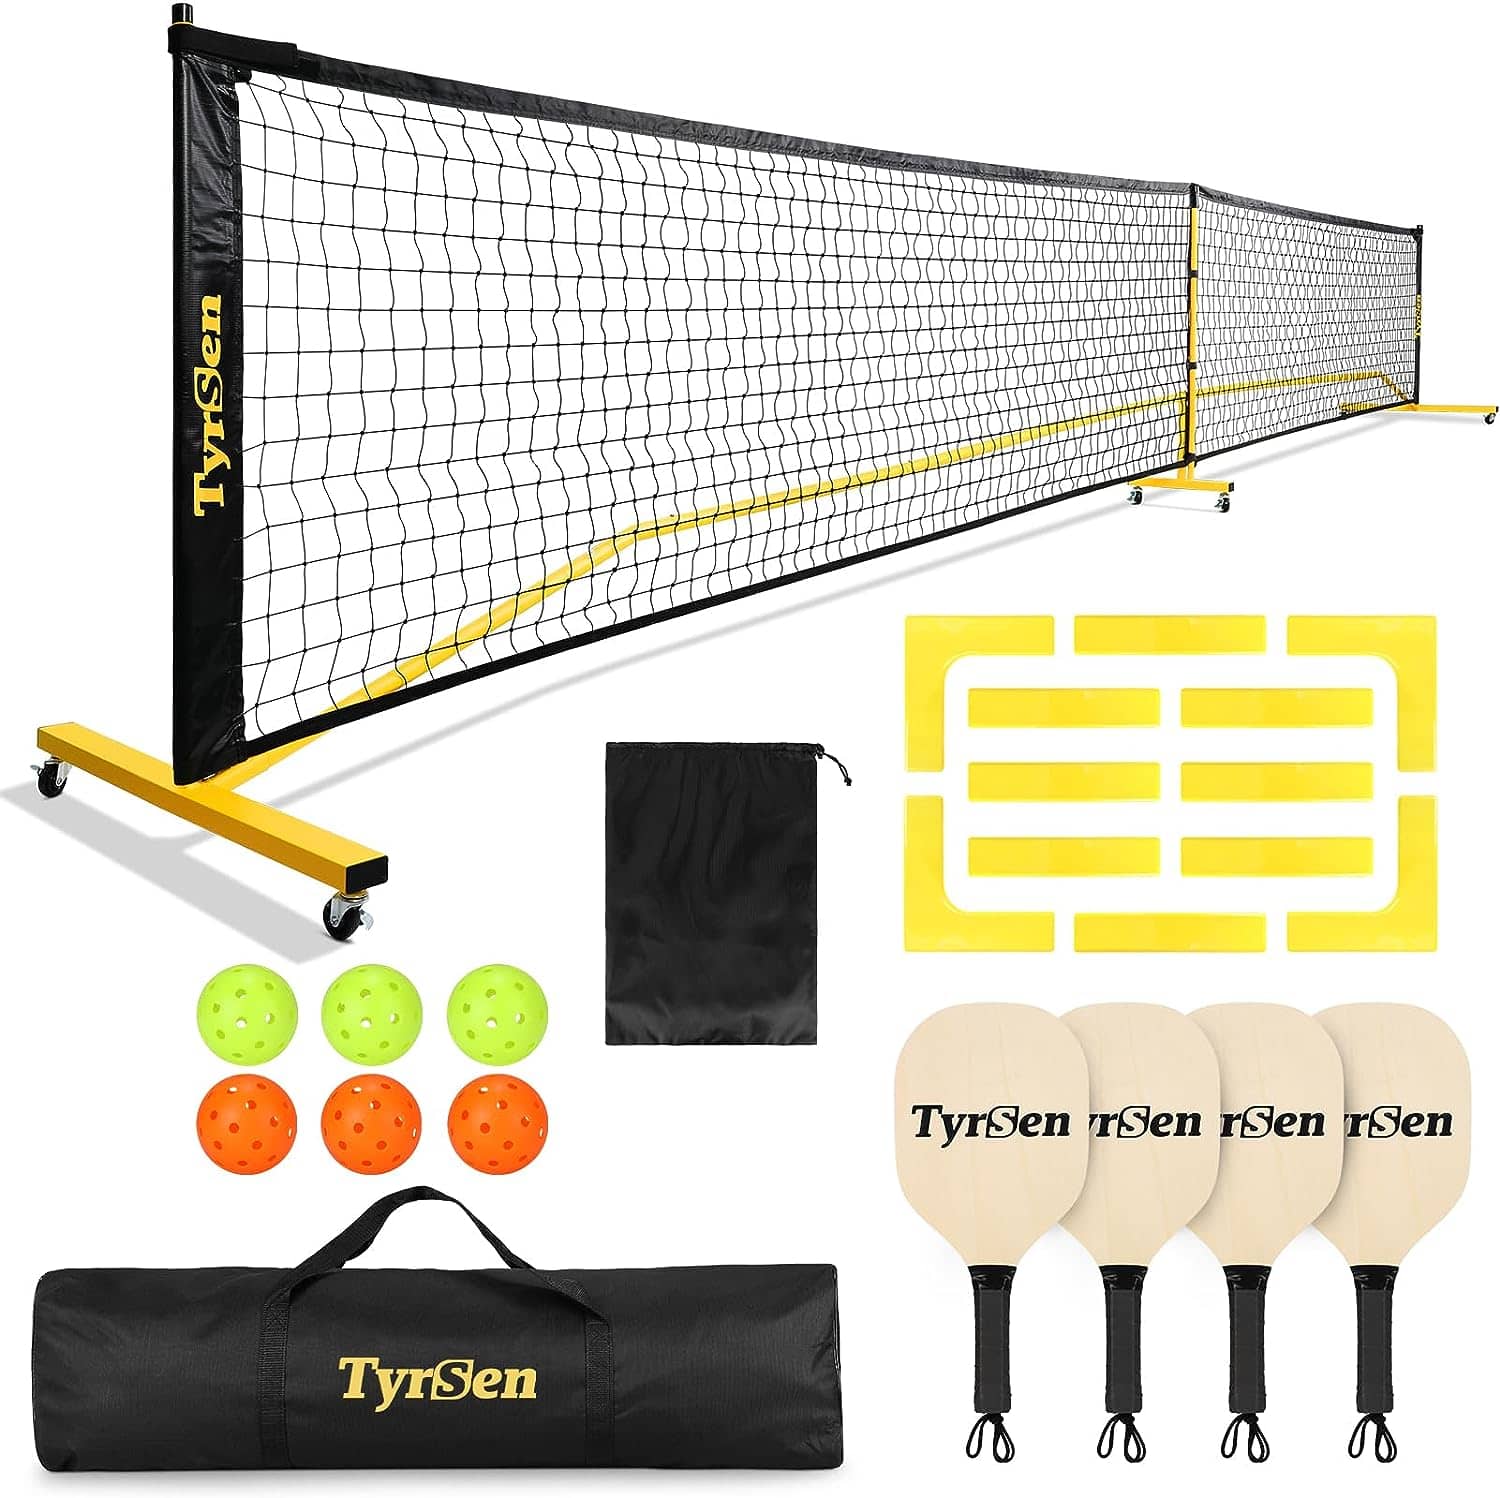 Pickleball Sets With Net and Lines: Our Top Picks